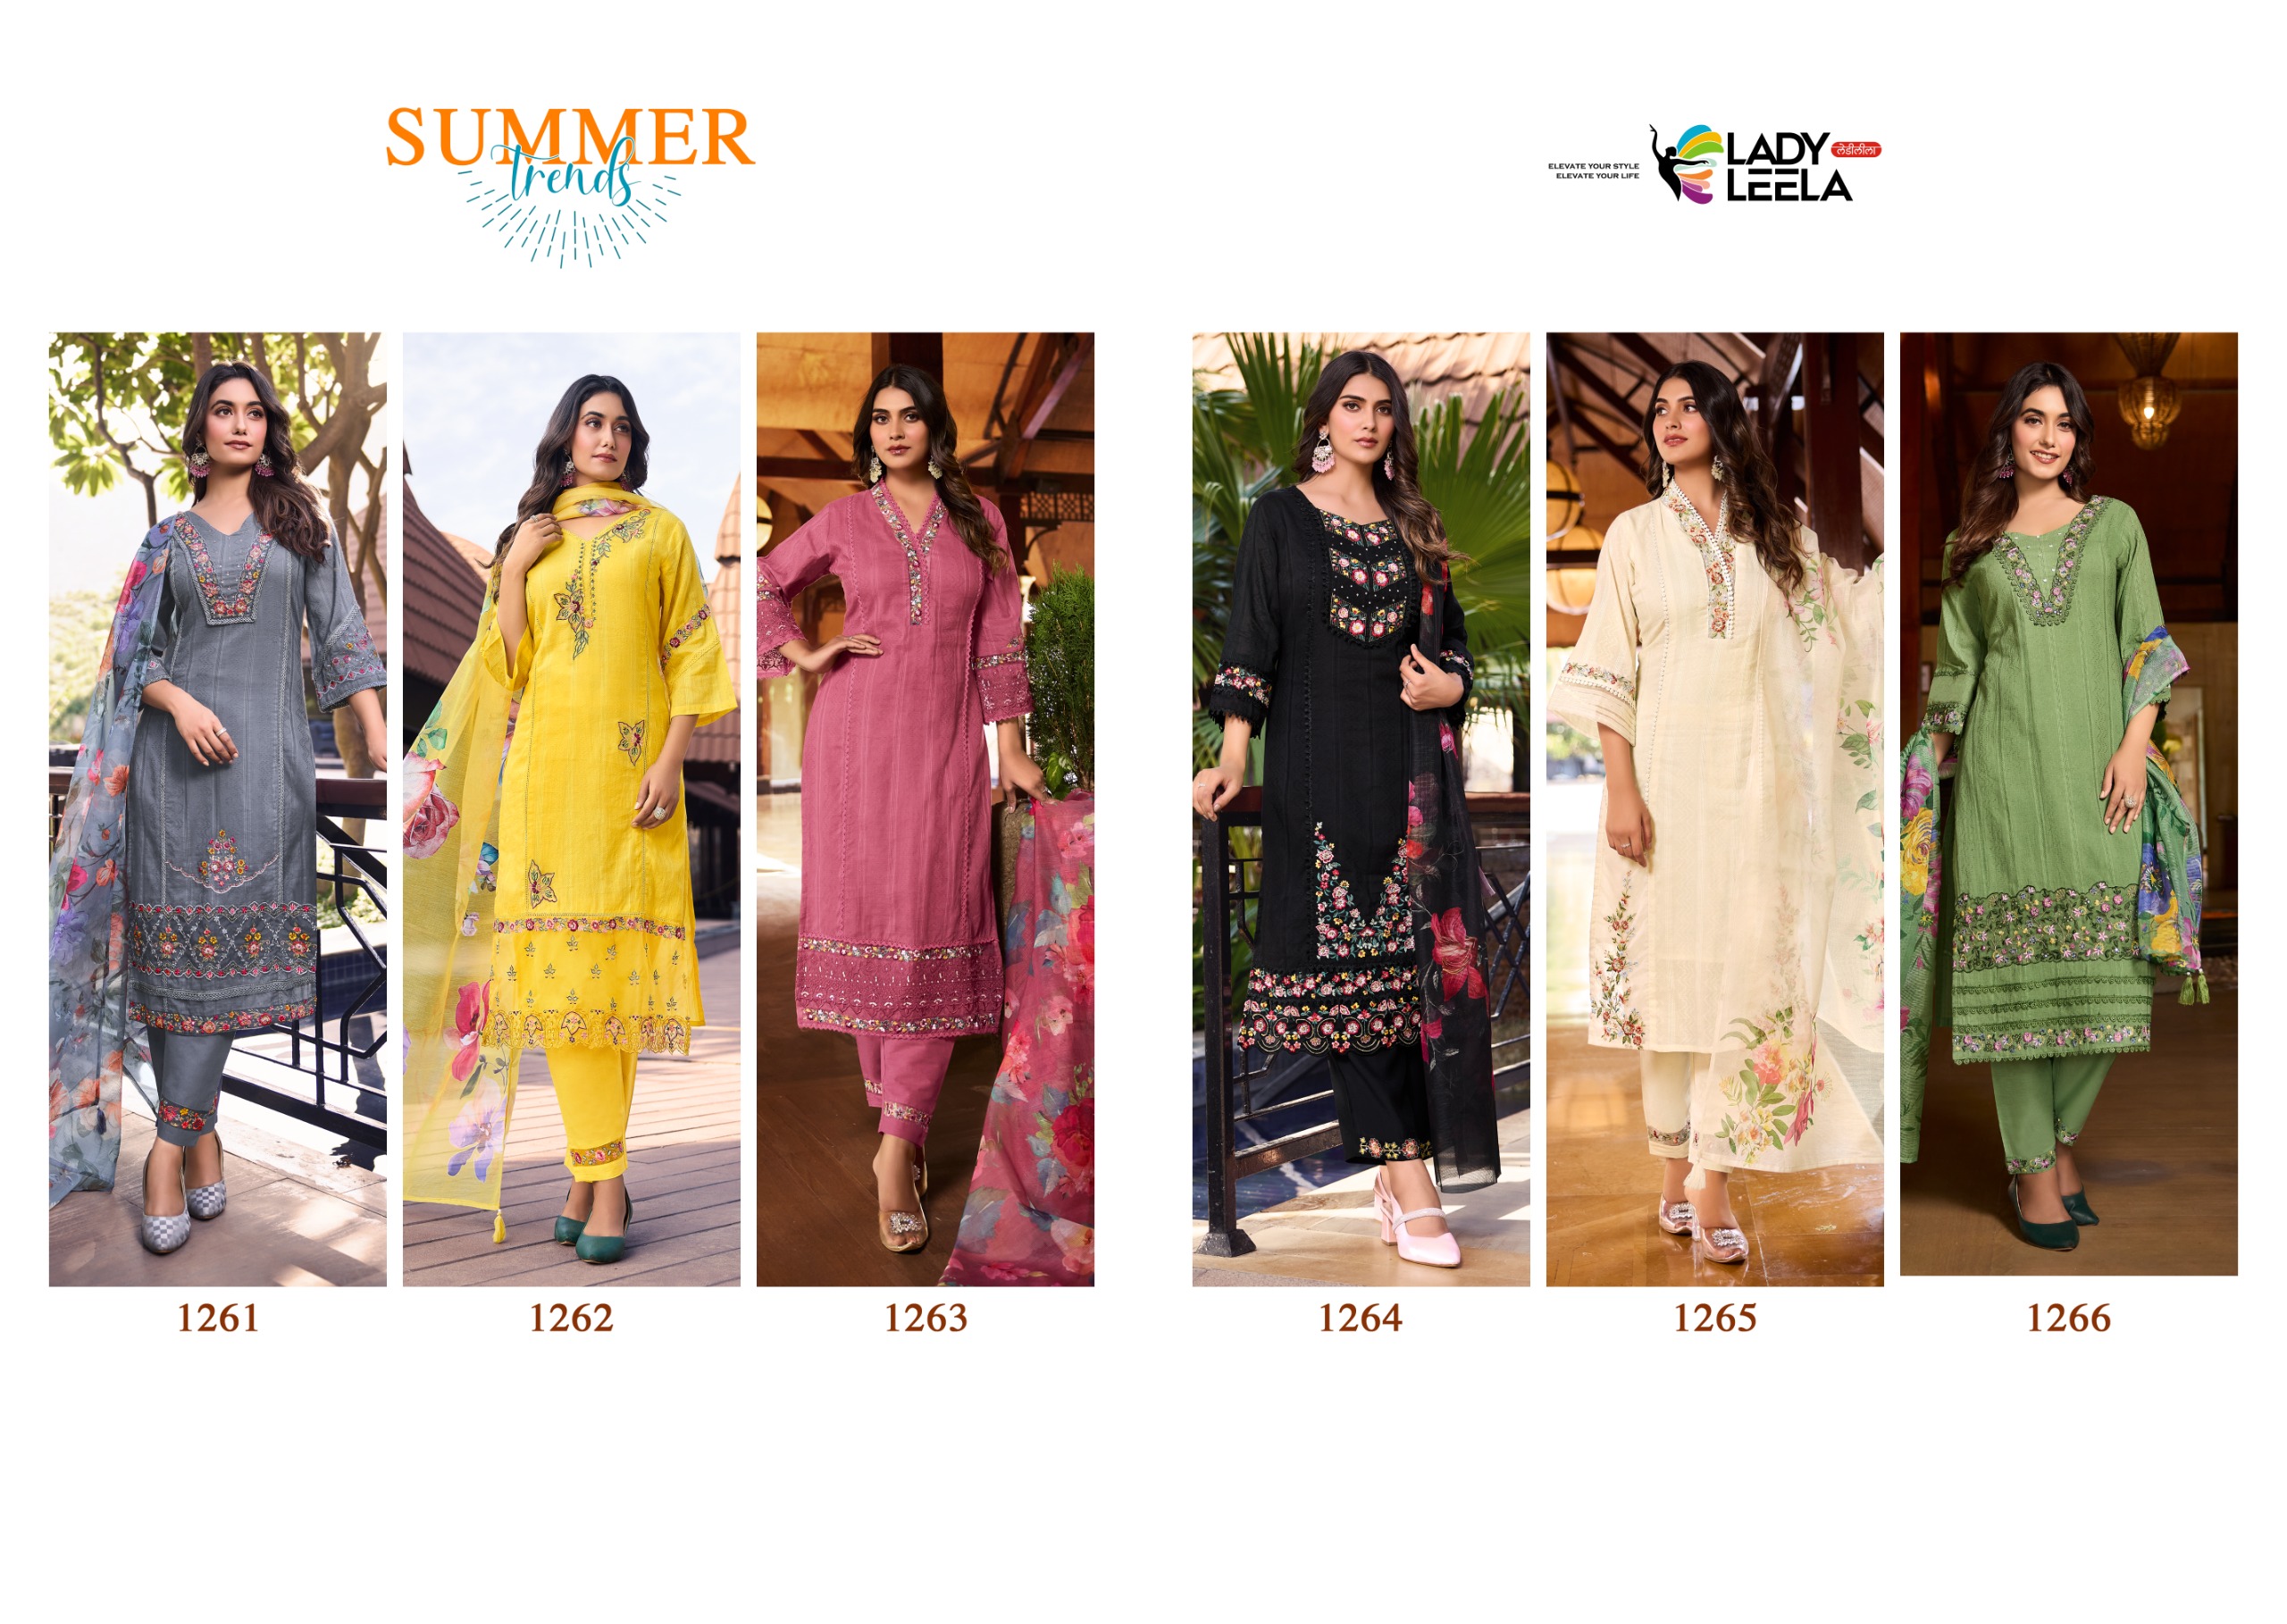 Lady Leela Summer Trends collection 2